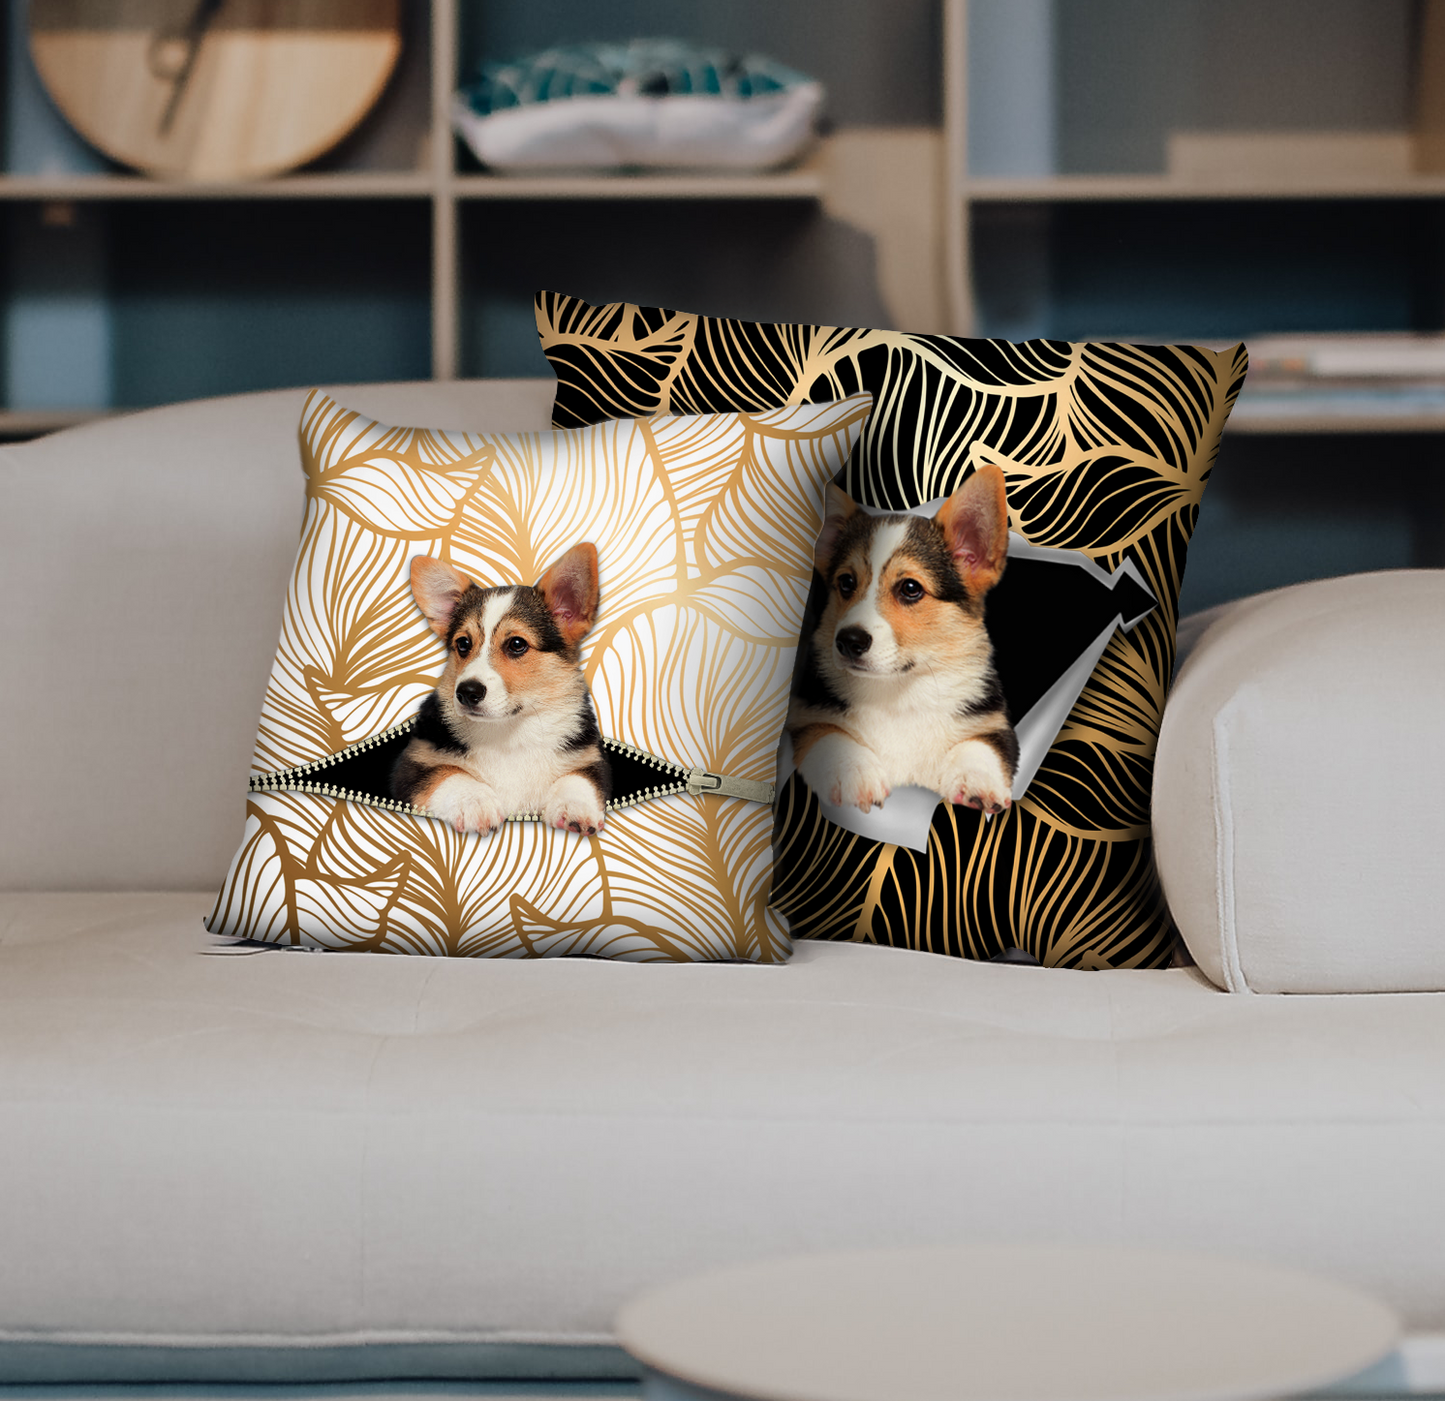 They Steal Your Couch - Welsh Corgi Pillow Cases V1 (Set of 2)